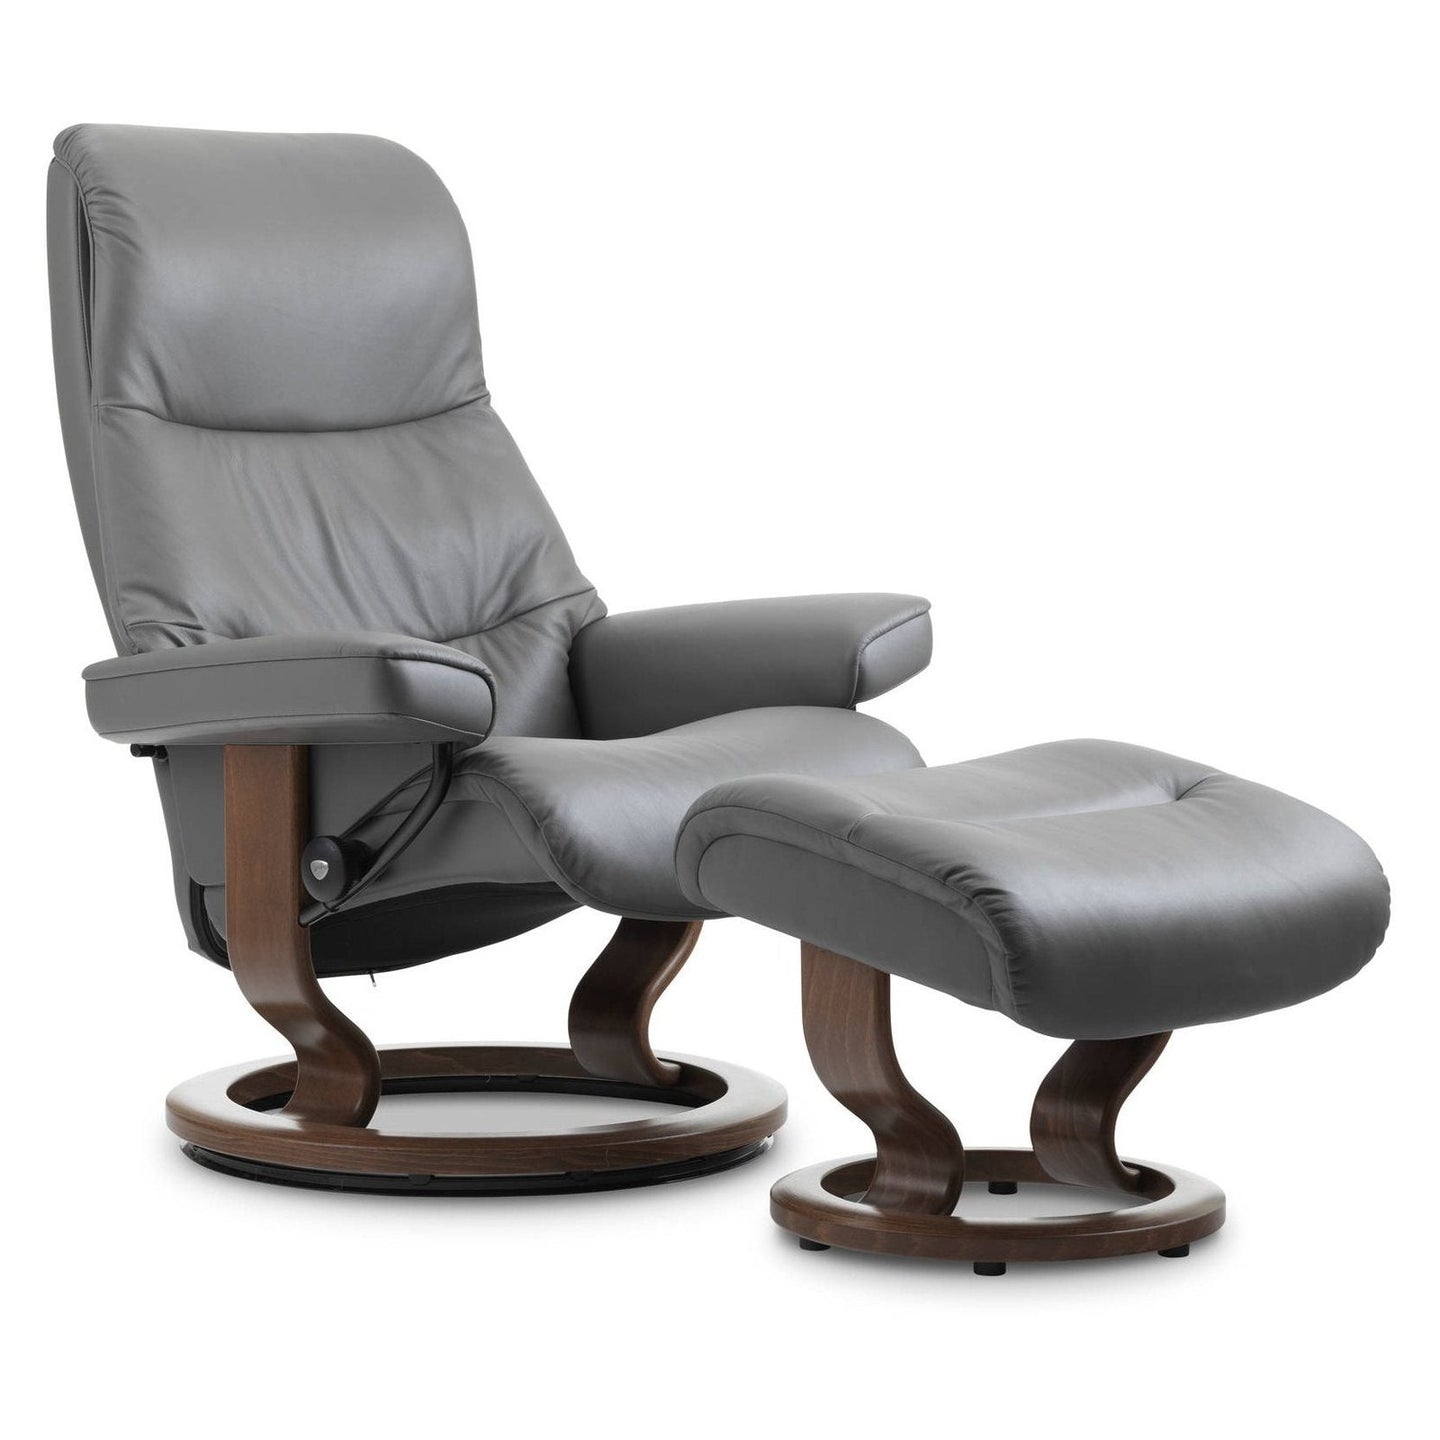 Stressless View Medium Recliner with Footstool